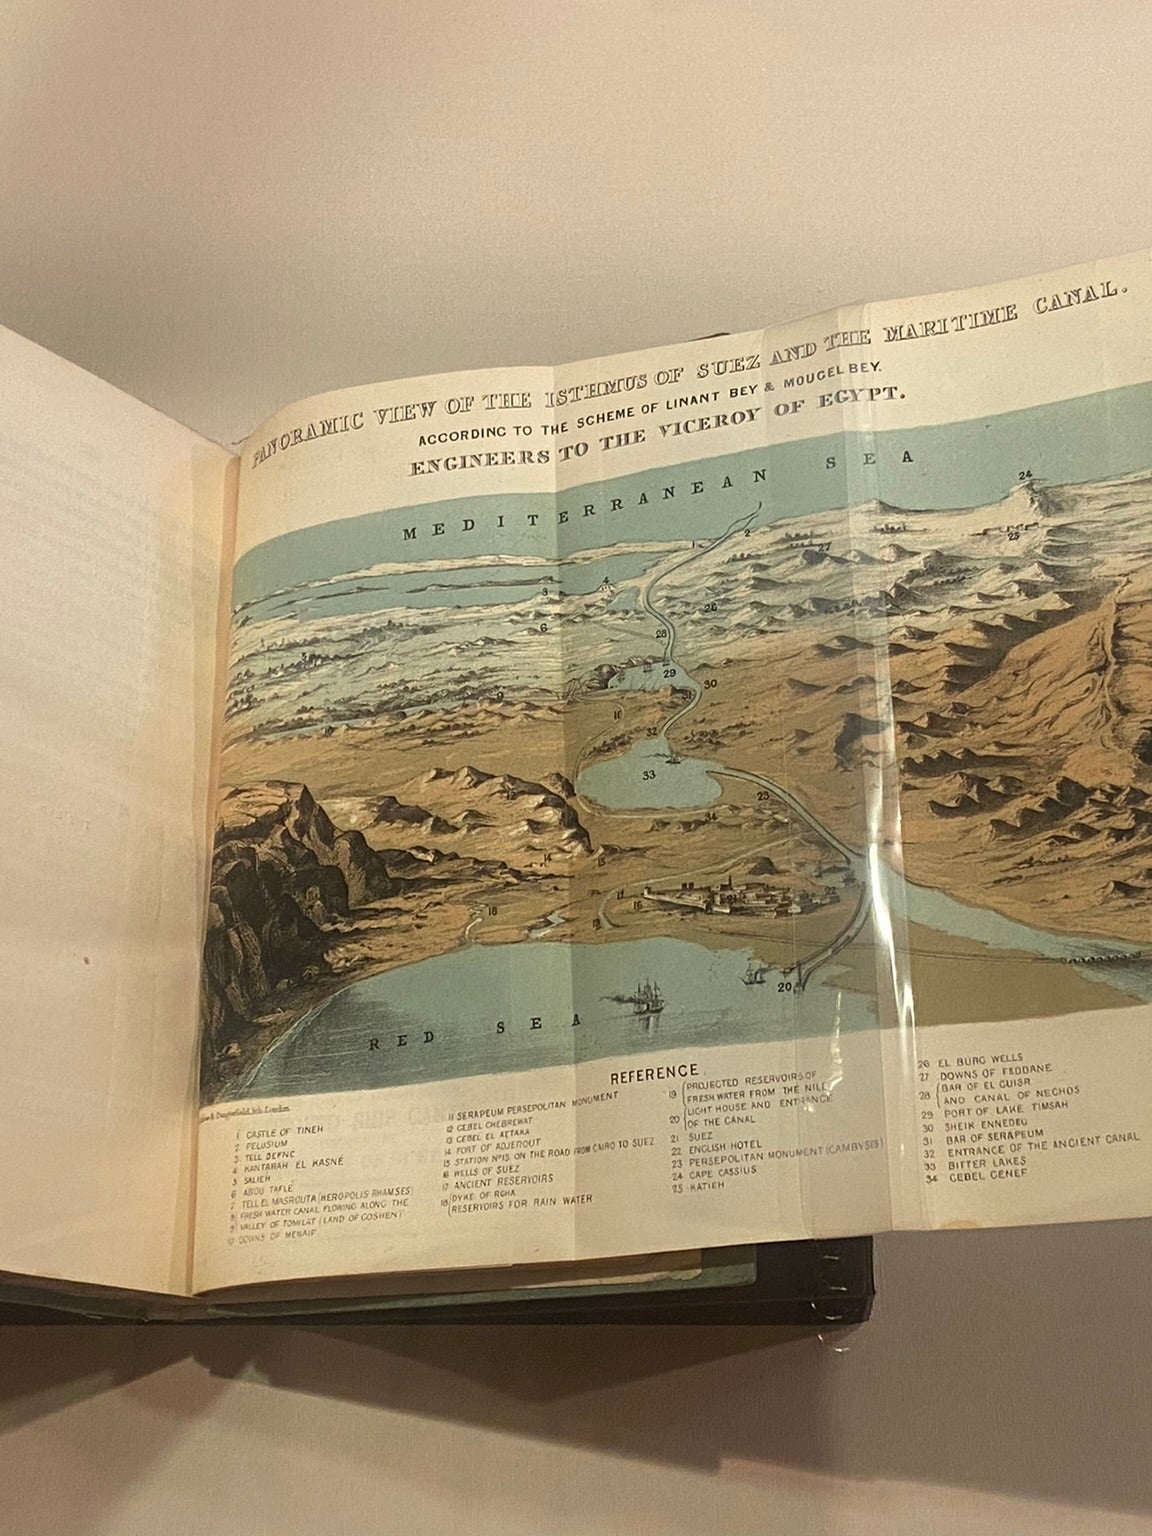 Photo of book by Ferdinand de Lesseps, The Isthmus of Suez Question 